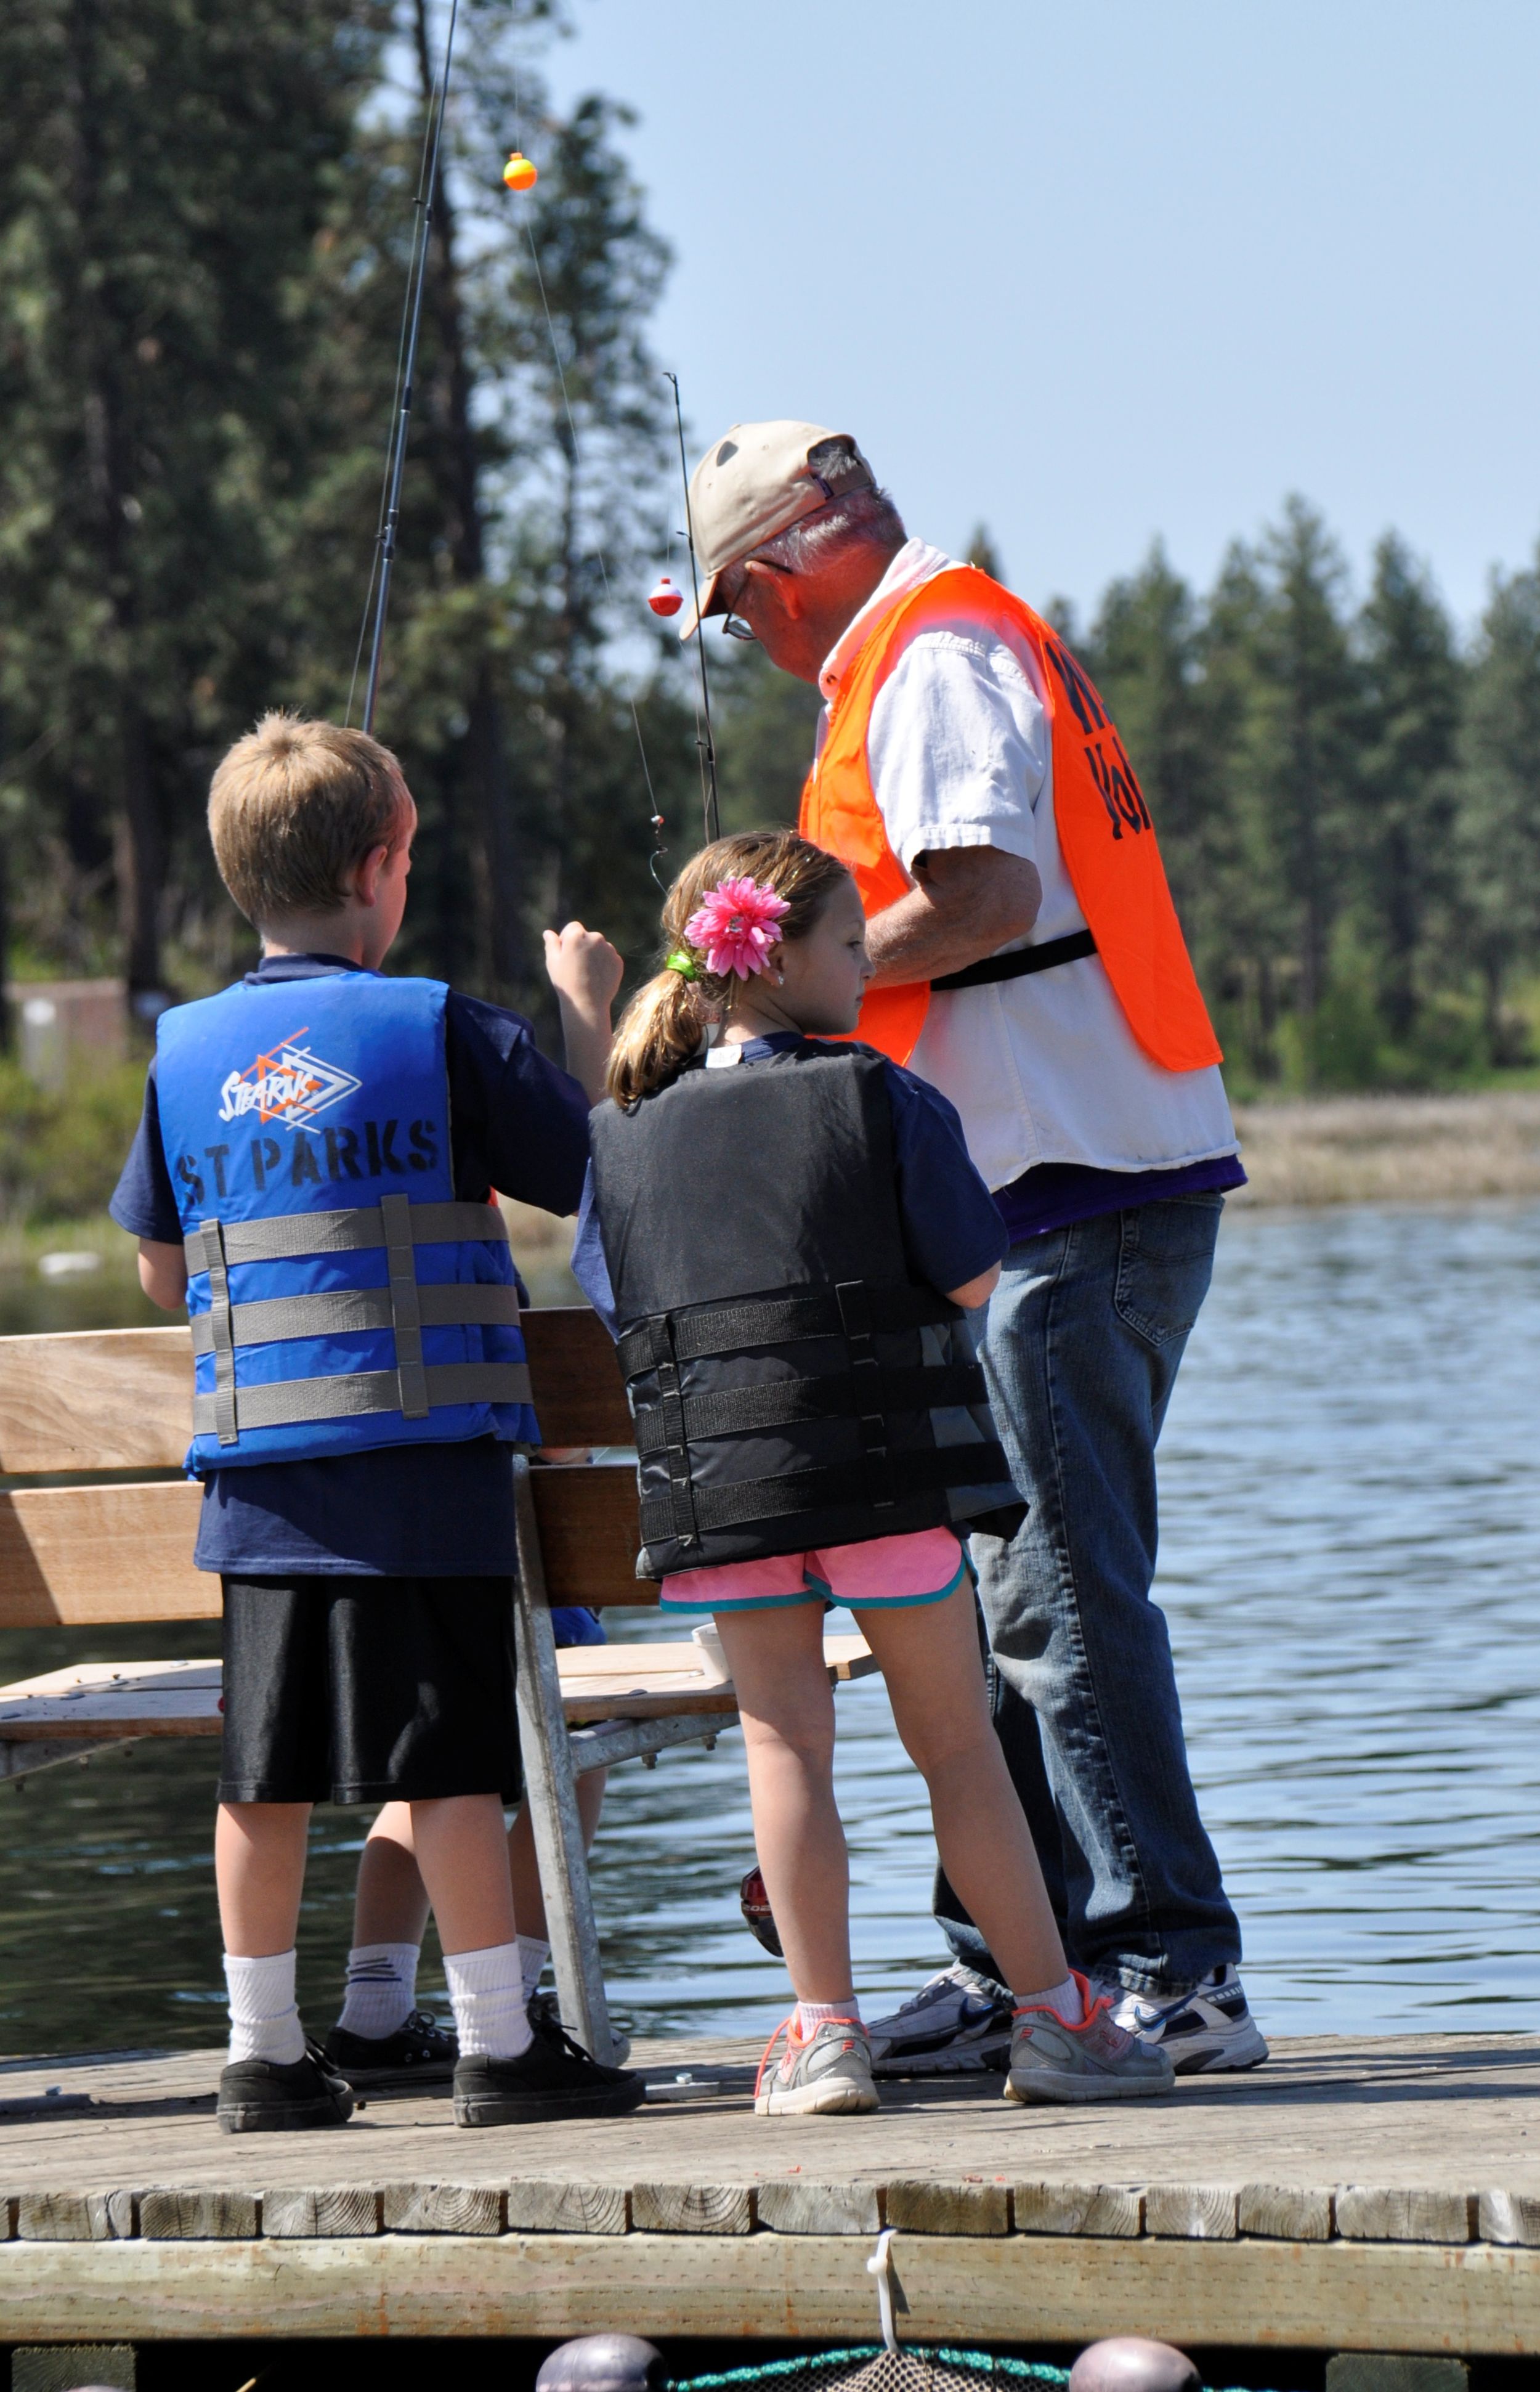 Pro angler hooks kids on fishing during North East event, News